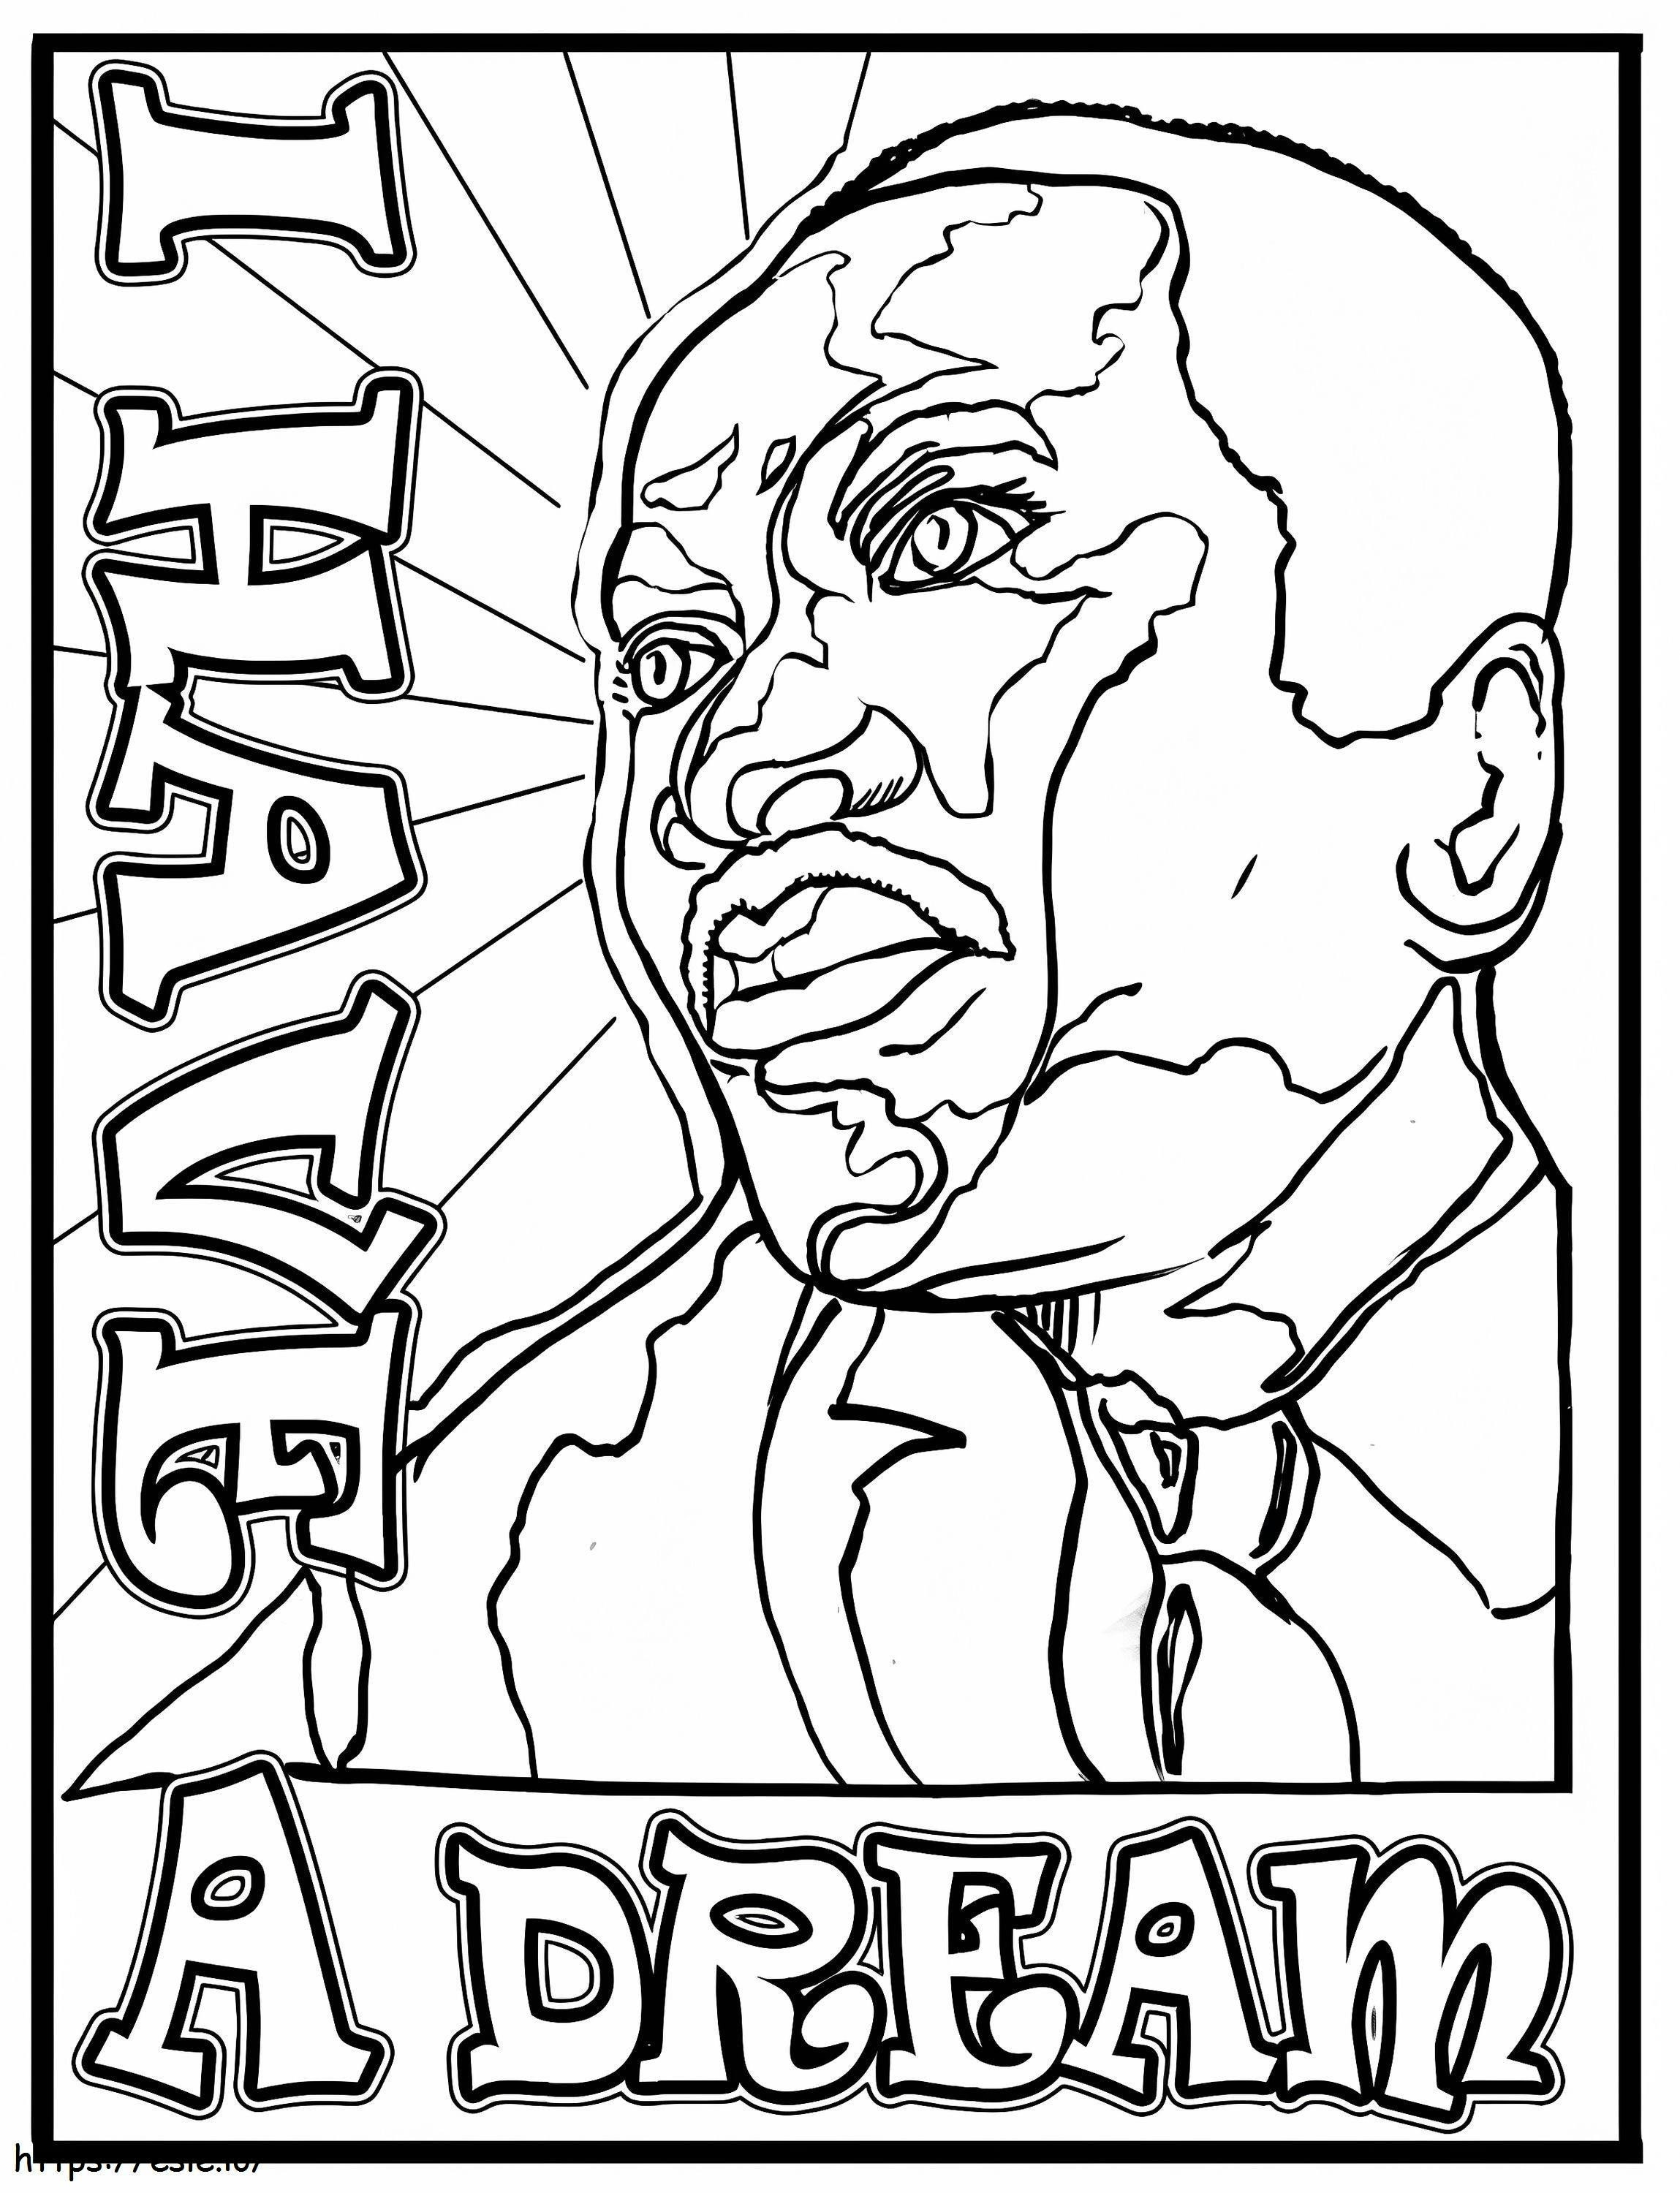 Martin Luther King Jr 13 coloring page